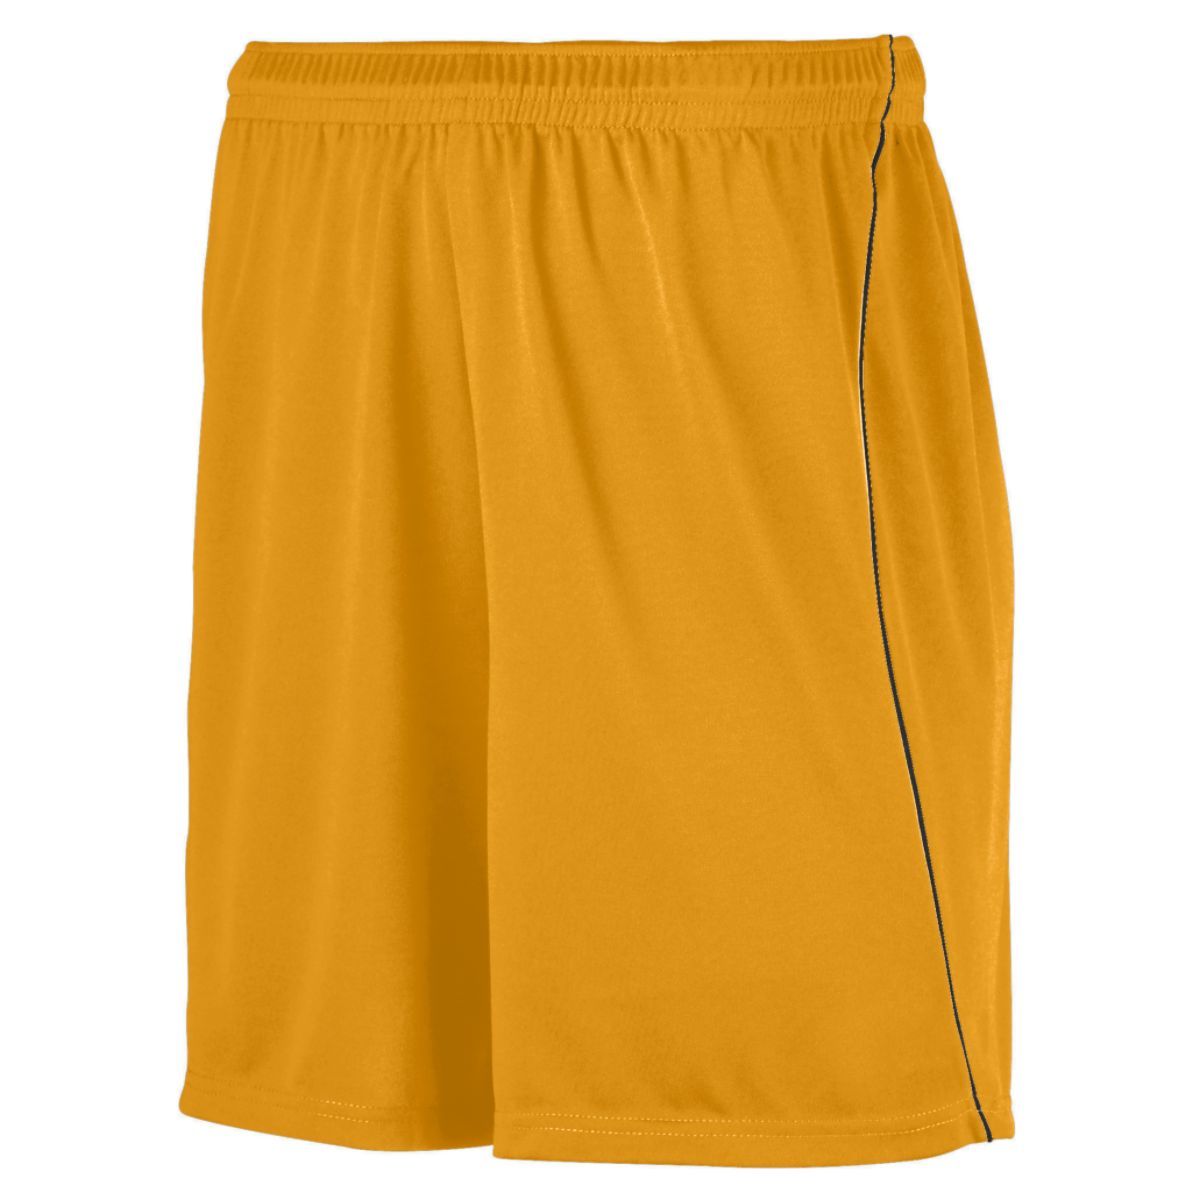 Augusta Sportswear Youth Wicking Soccer Shorts With Piping in Gold/Black  -Part of the Youth, Youth-Shorts, Augusta-Products, Soccer, All-Sports-1 product lines at KanaleyCreations.com